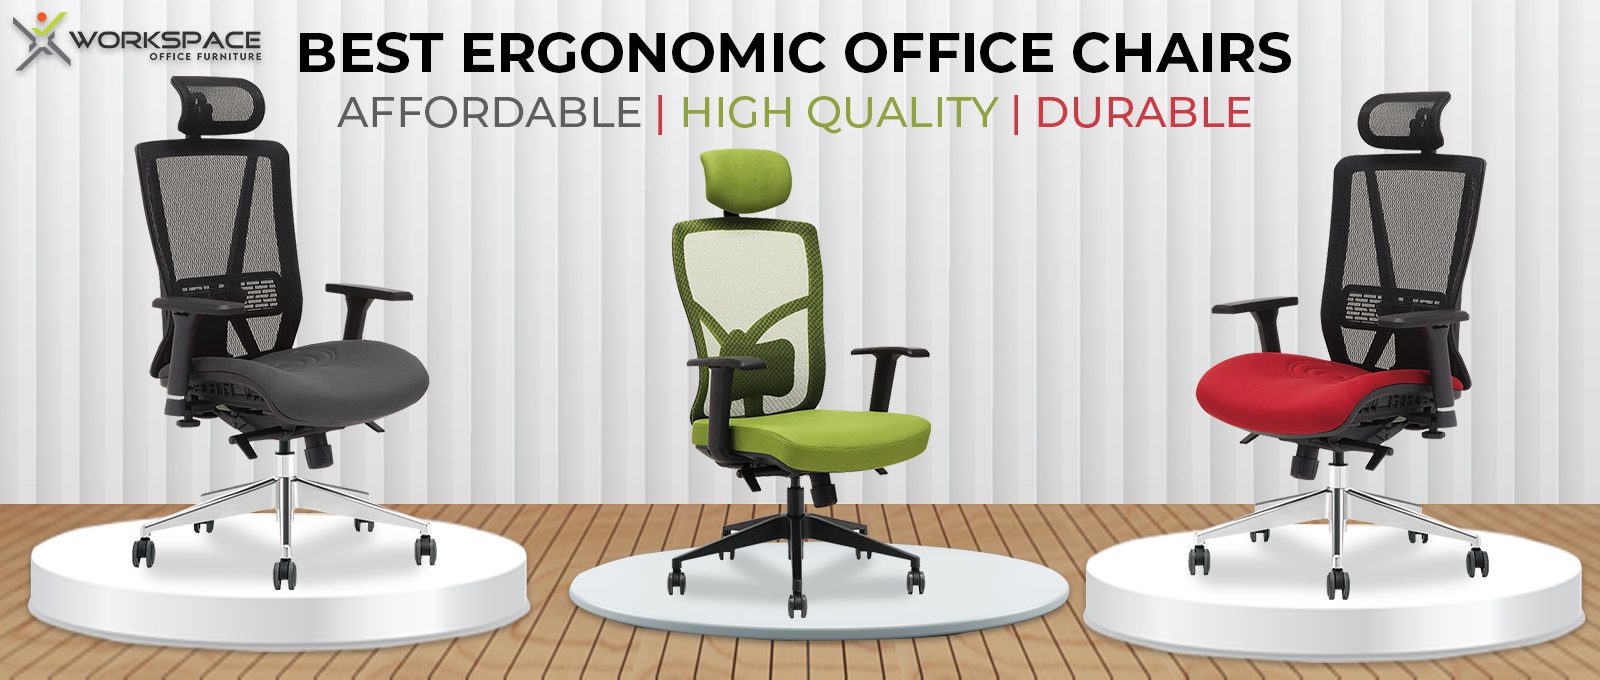 Office Furniture Office Chairs Office Tables Workstations Office Accessories Gaming Products